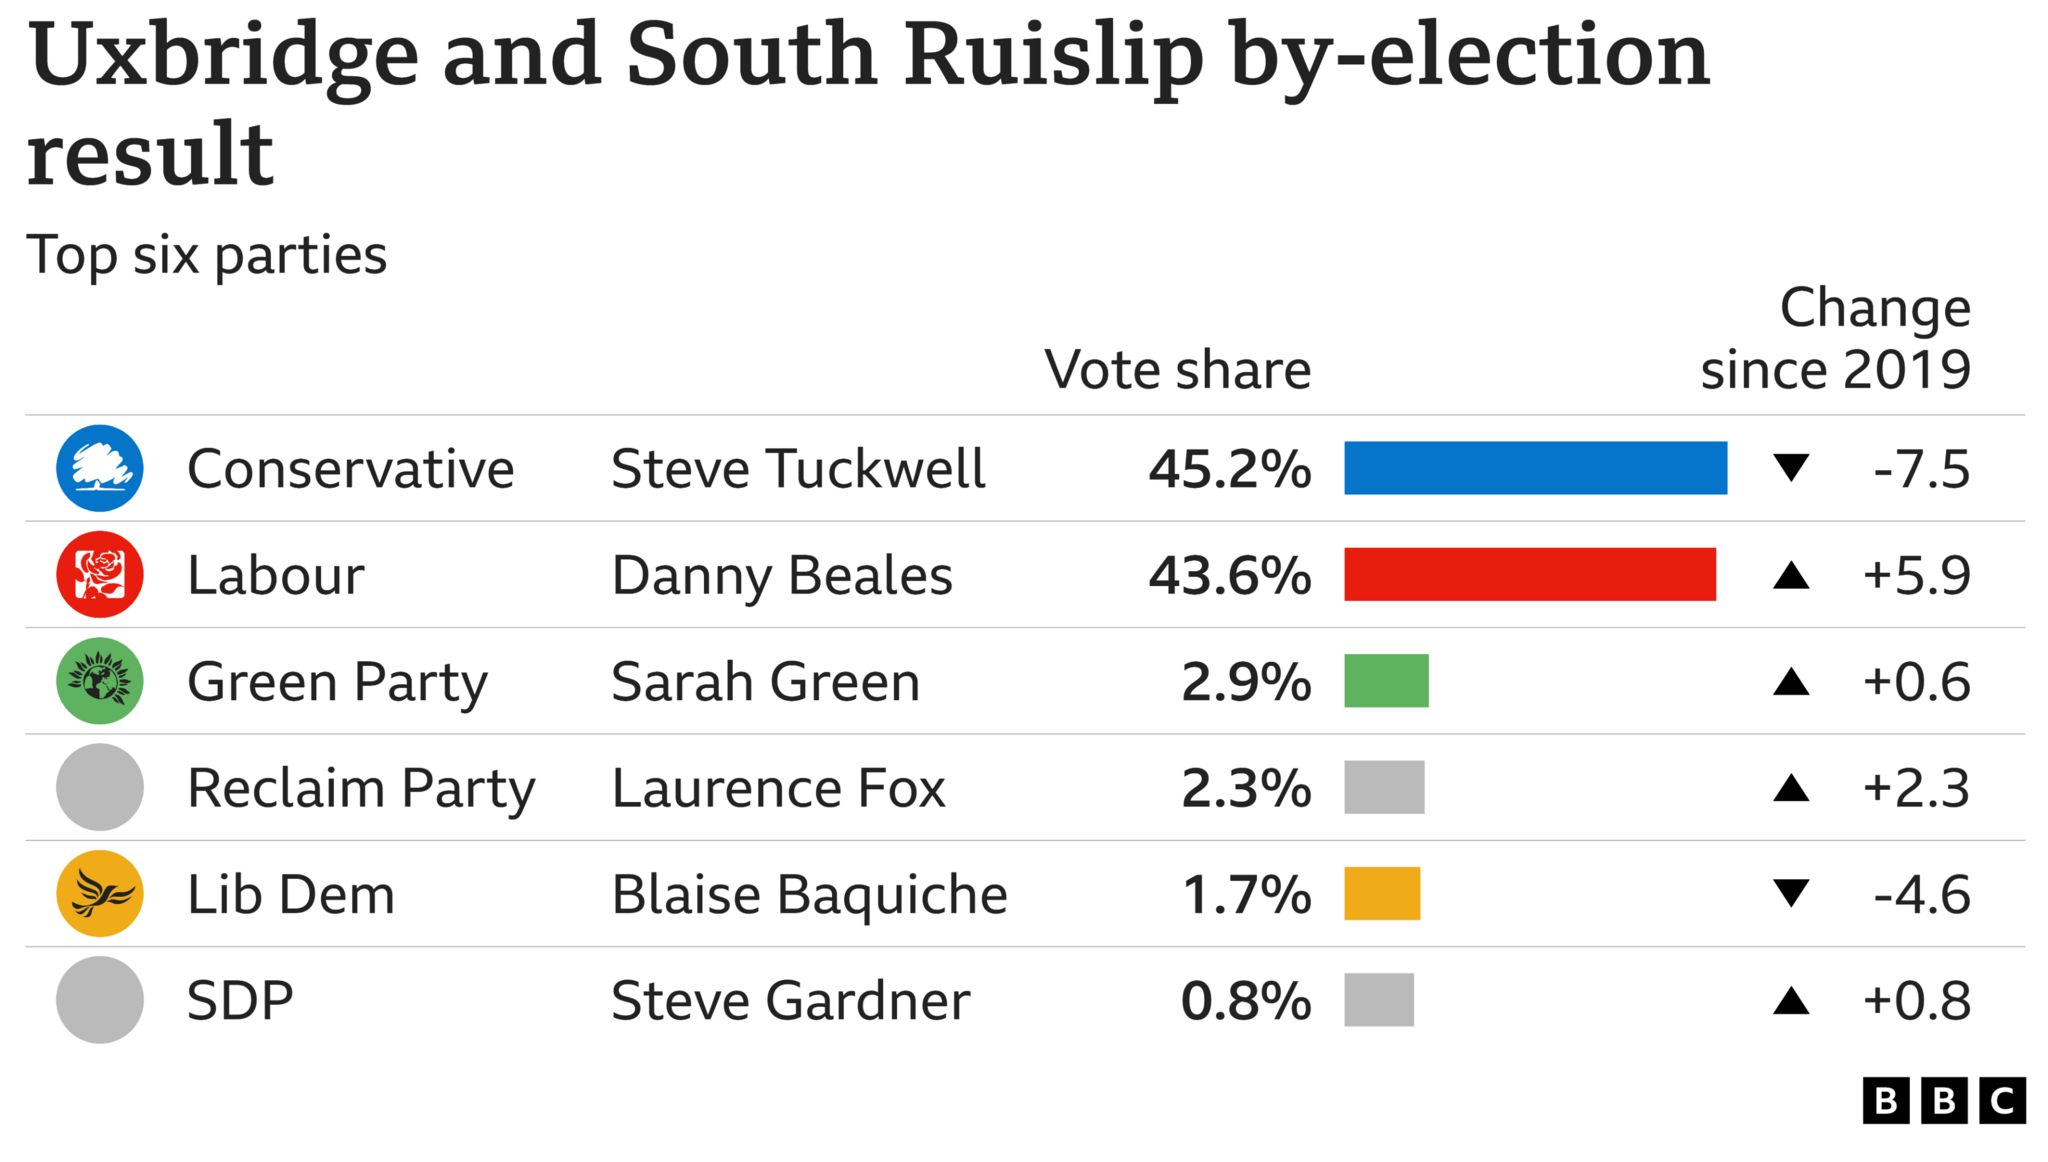 Uxbridge and South Ruislip by-election result